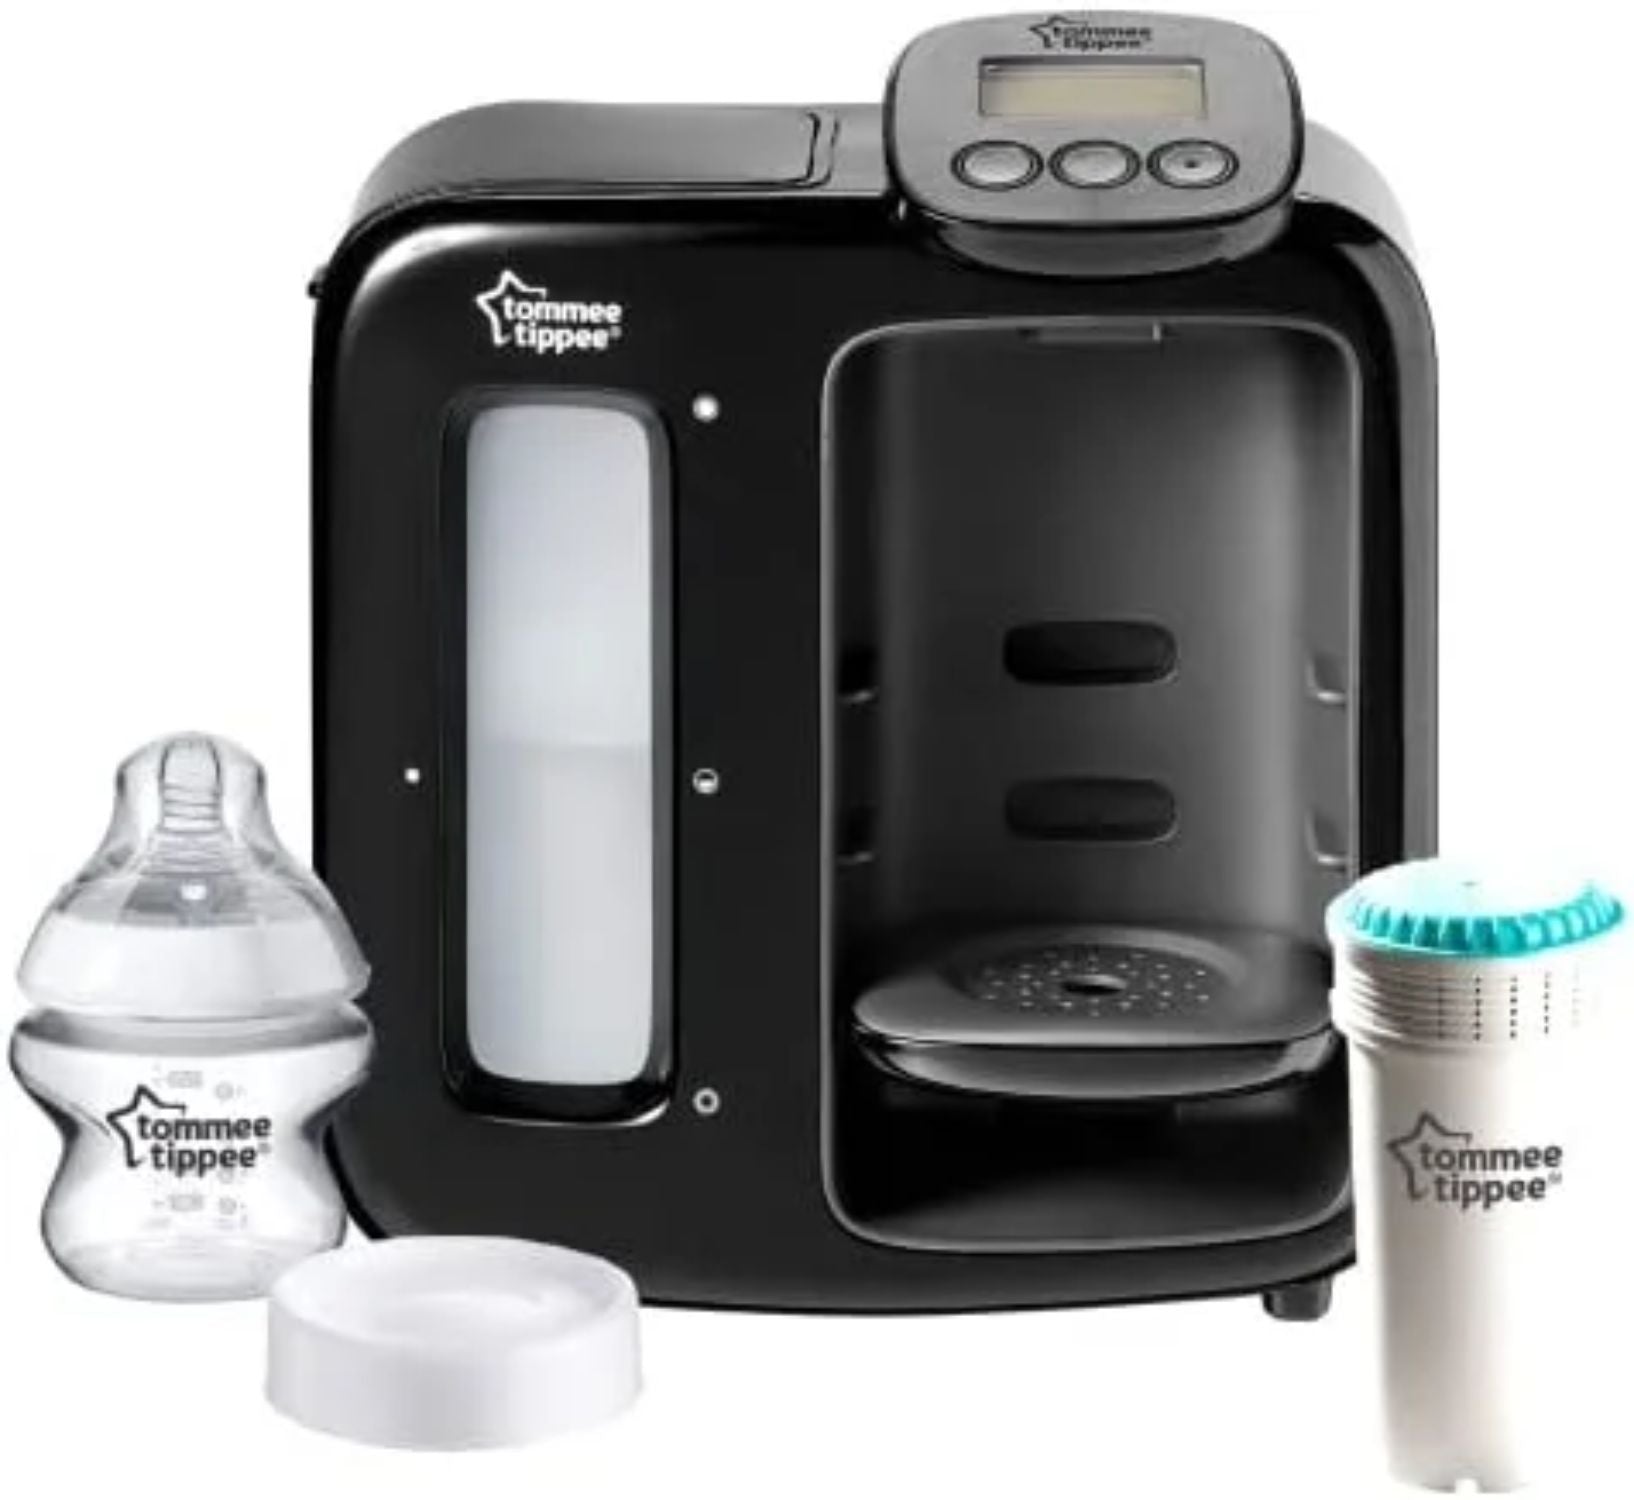 Tommee Tippee Perfect Prep Day & Night, Baby Bottle Maker Machine with Digital Display and Adjustable Volume, Black and Grey